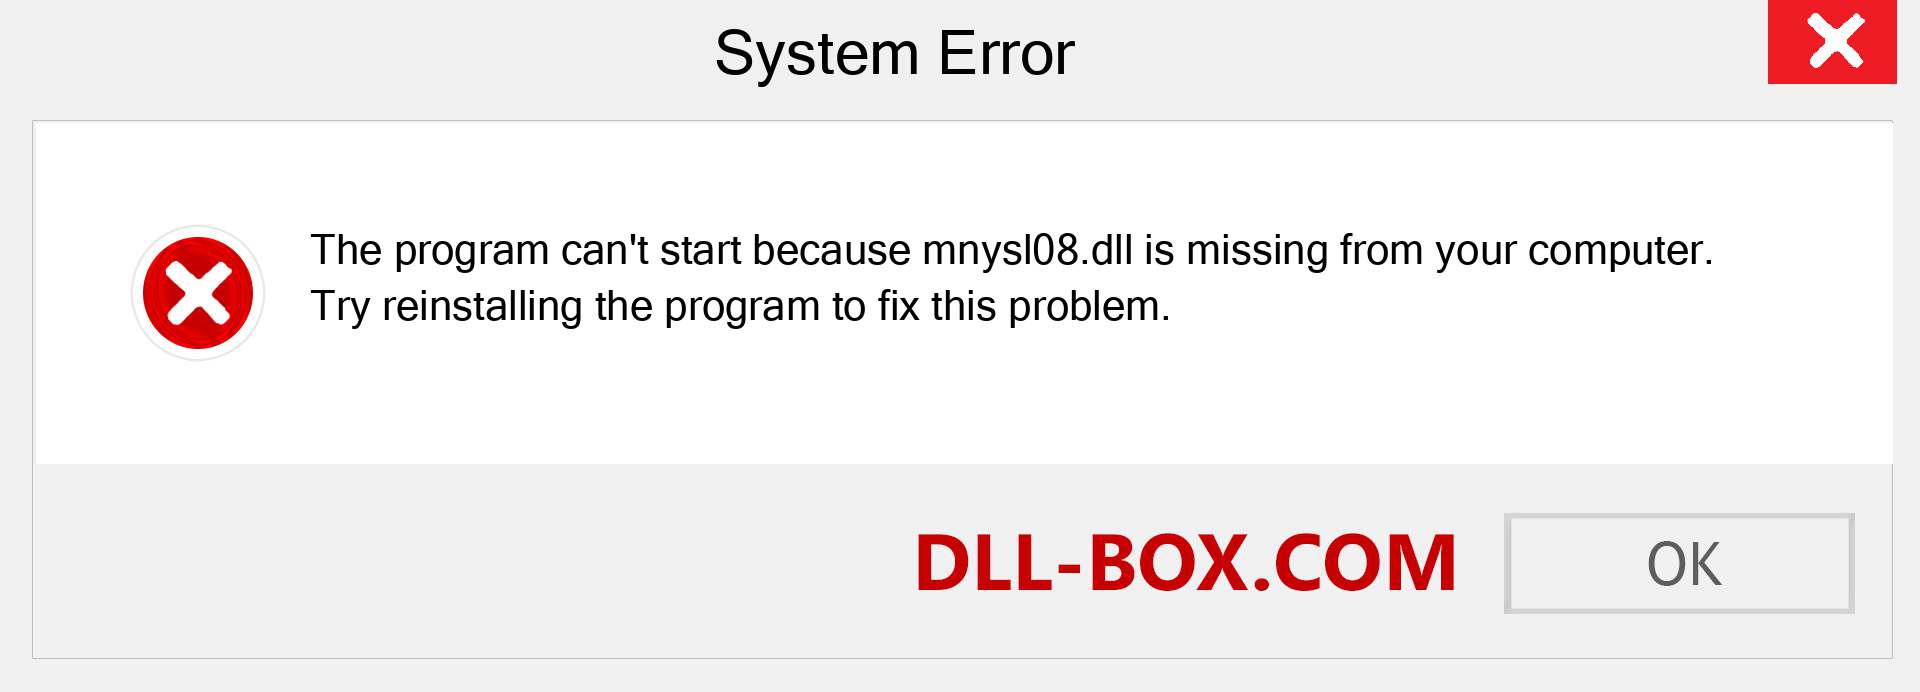  mnysl08.dll file is missing?. Download for Windows 7, 8, 10 - Fix  mnysl08 dll Missing Error on Windows, photos, images